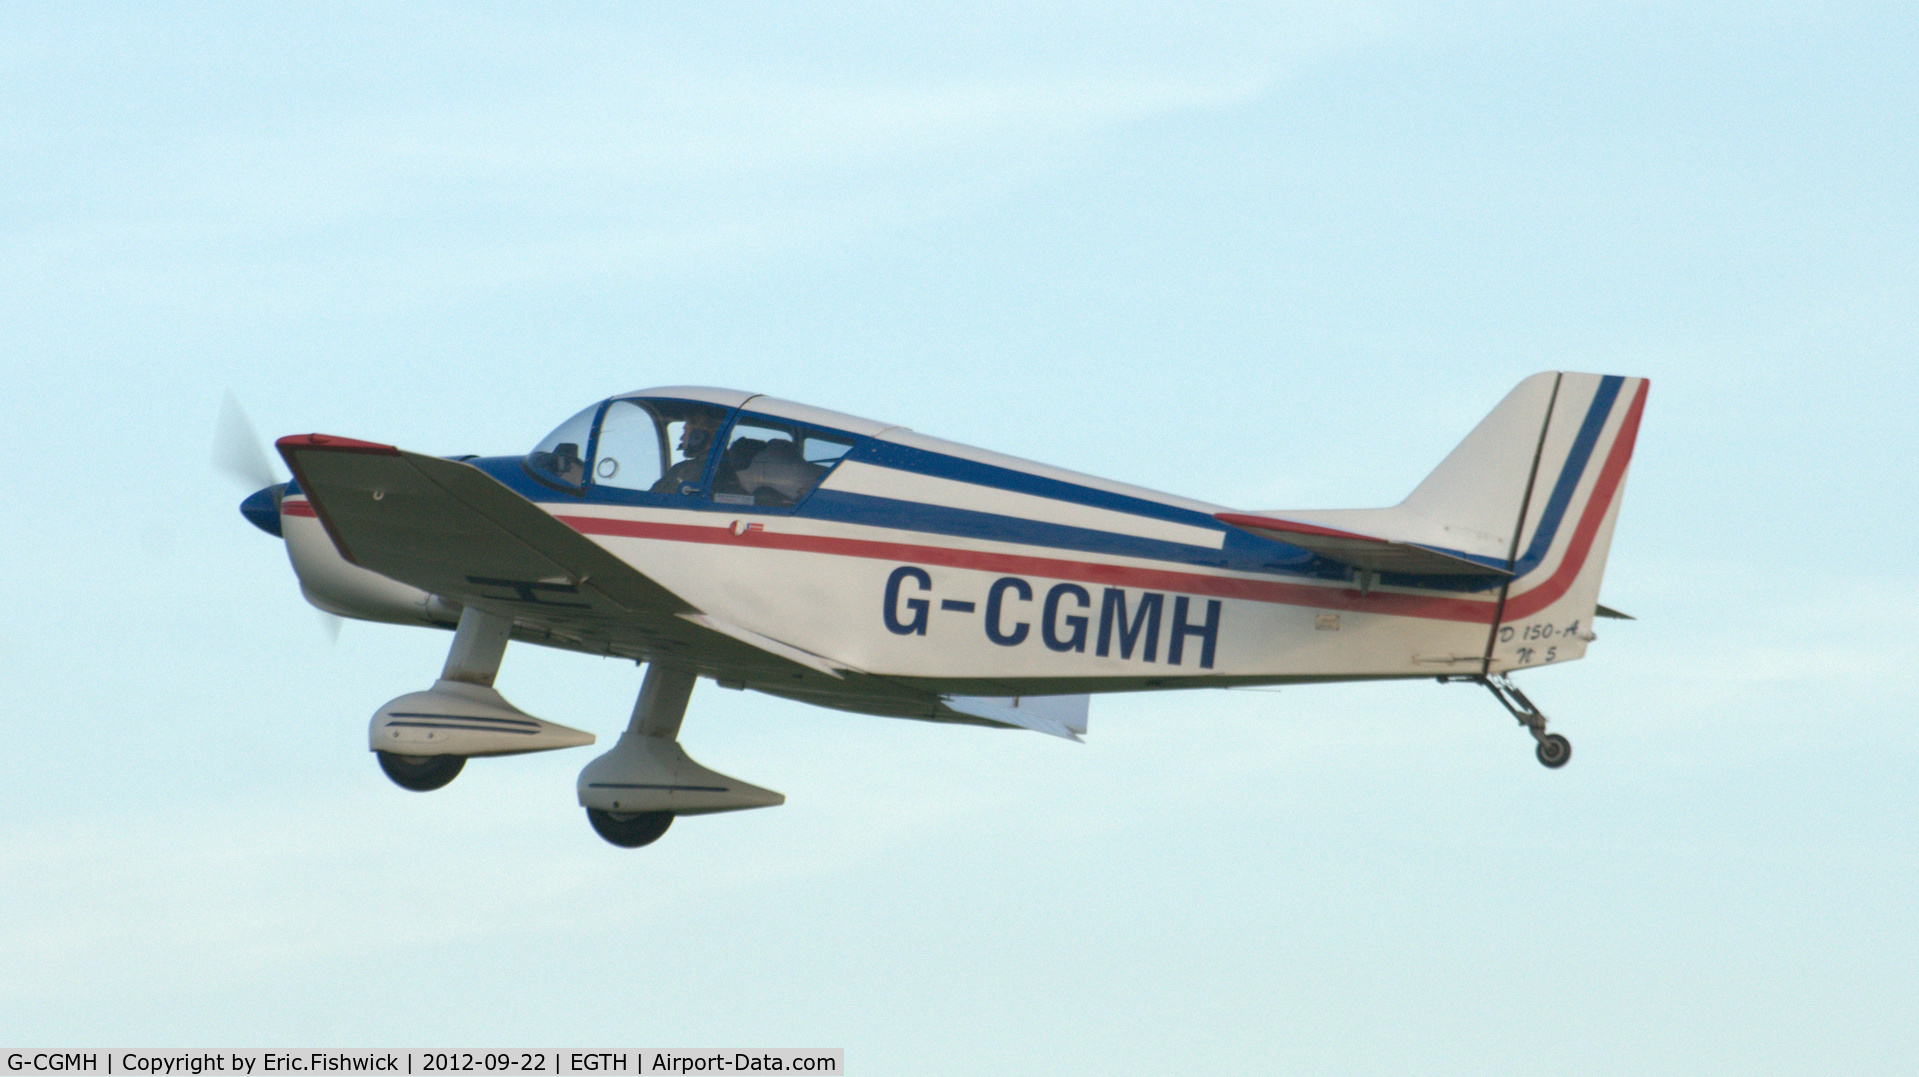 G-CGMH, 1963 SAN Jodel D-150A Mascaret C/N 05, 4. G-CGMH departing Shuttleworth Uncovered - Air Show, Sept. 2012.